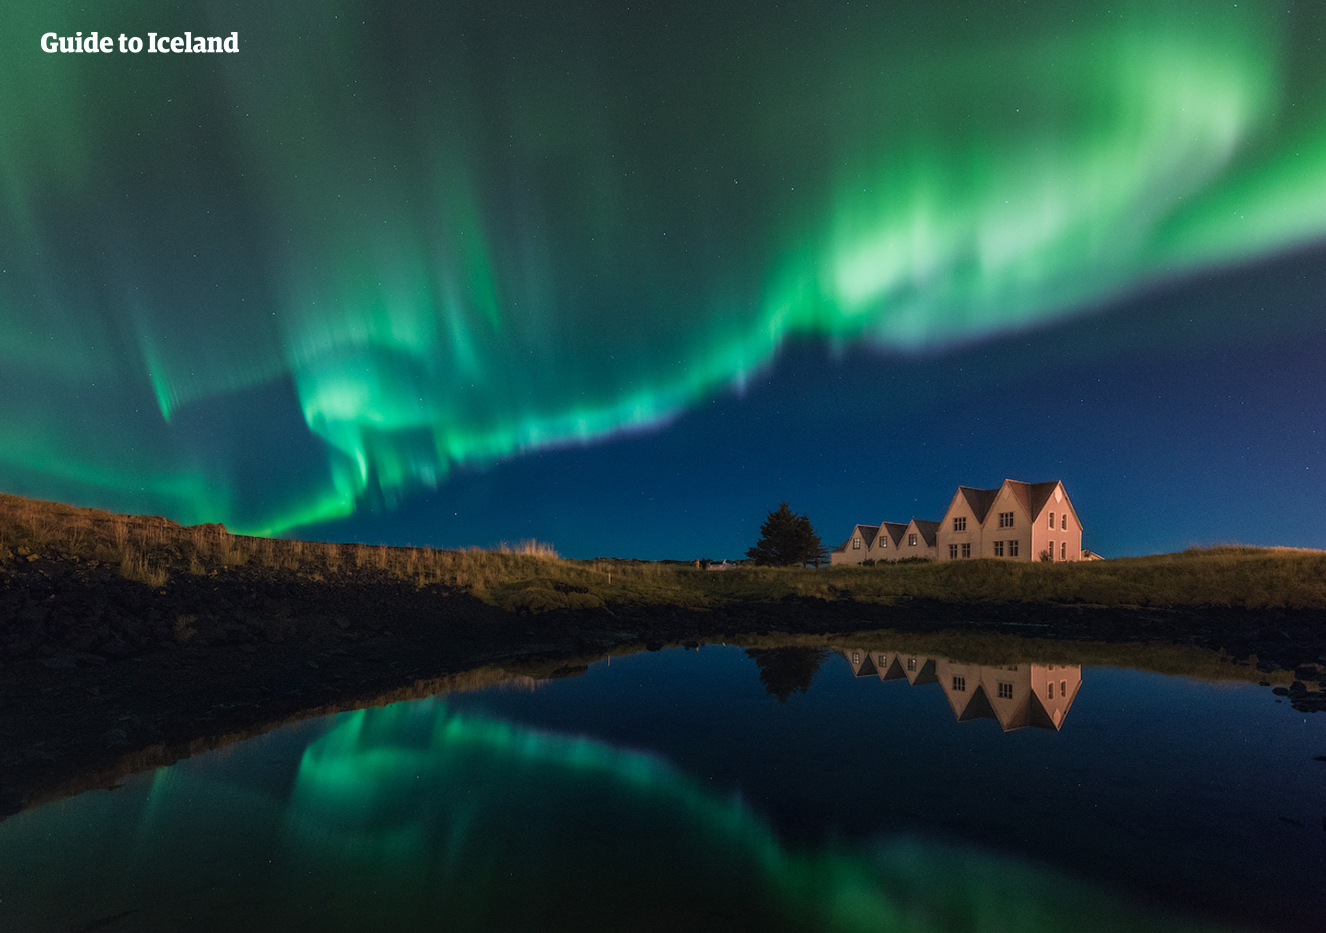 The beautiful Northern Lights dancing over a lonely house on the Reykjanes Peninsula.